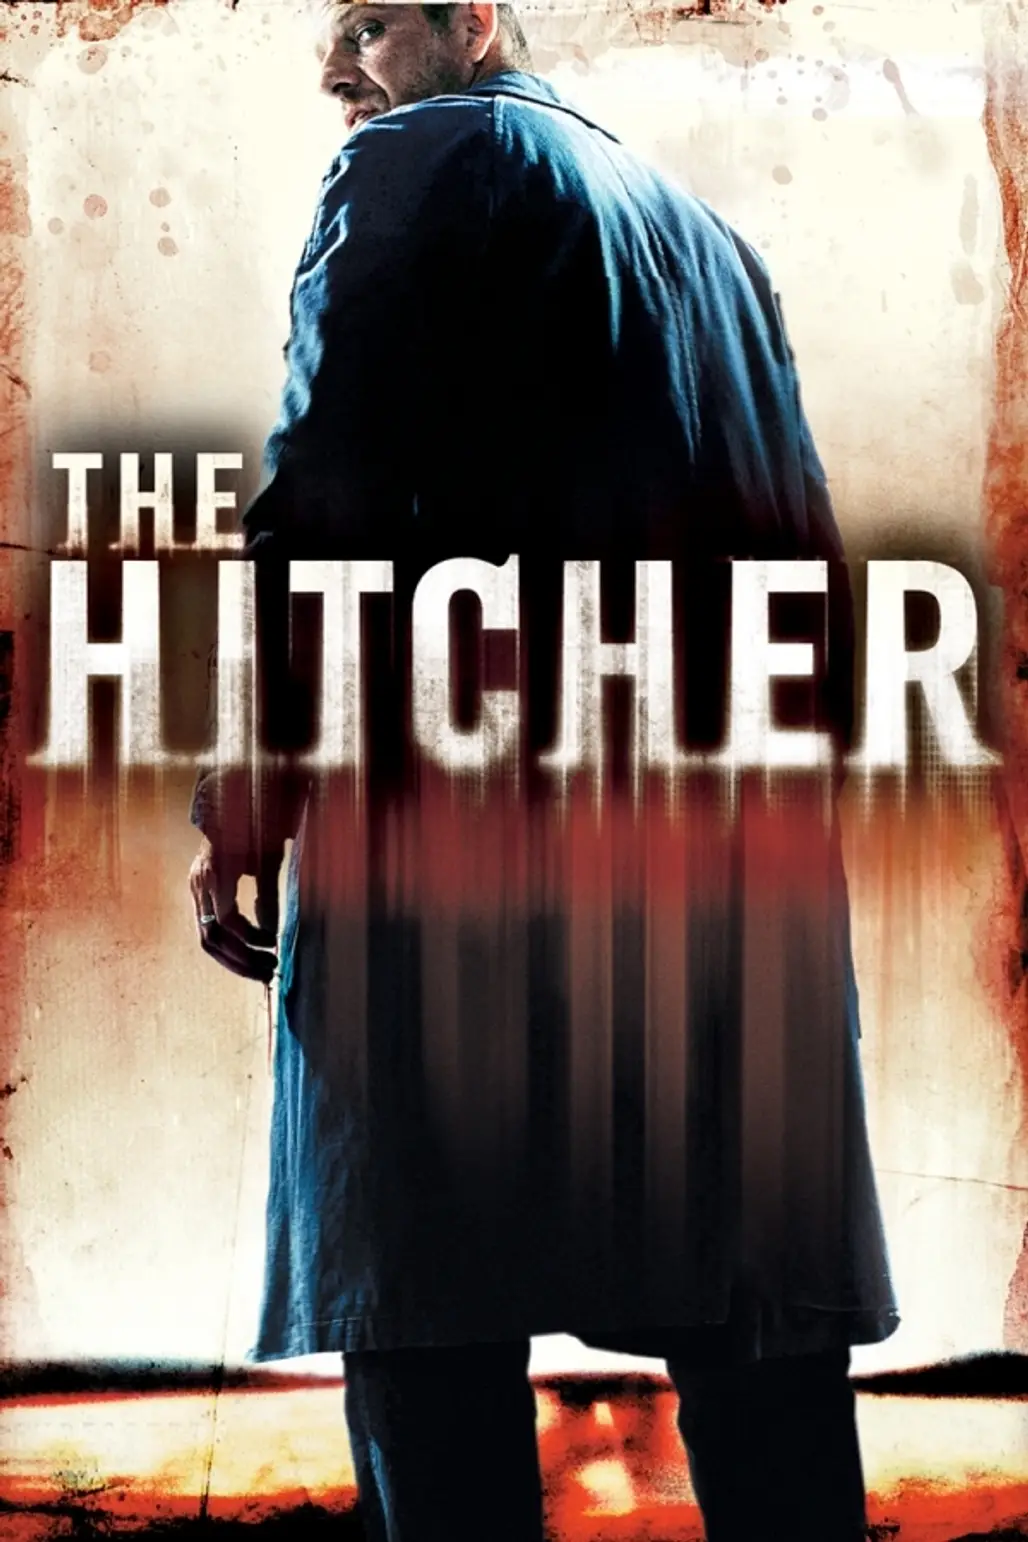 John Ryder in the Hitcher